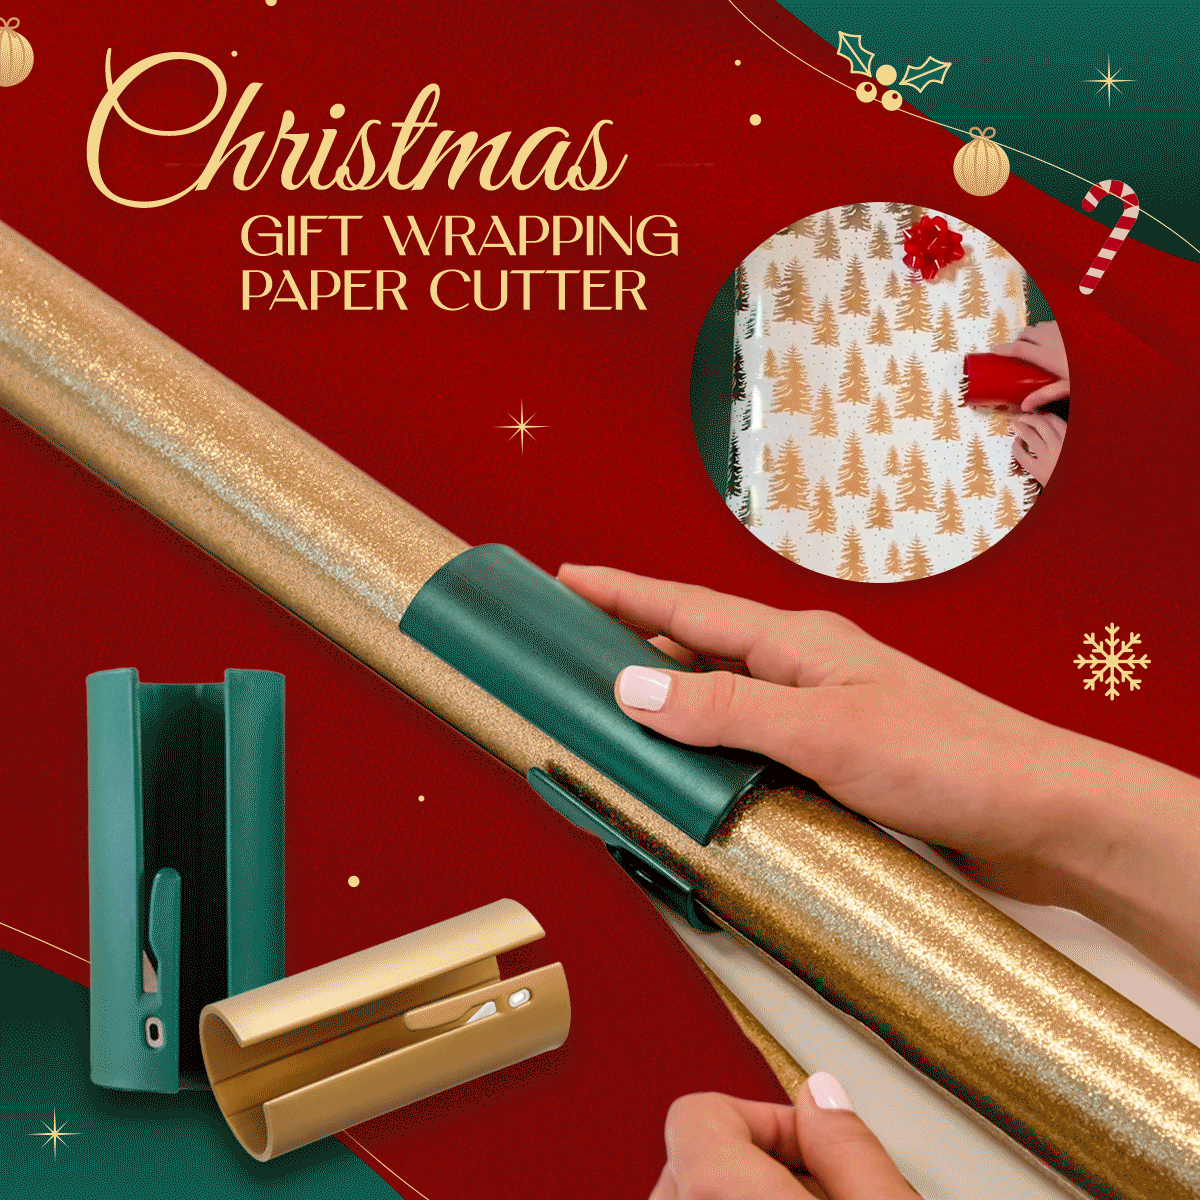 Image of a Christmas Gift Wrapping Paper Cutter